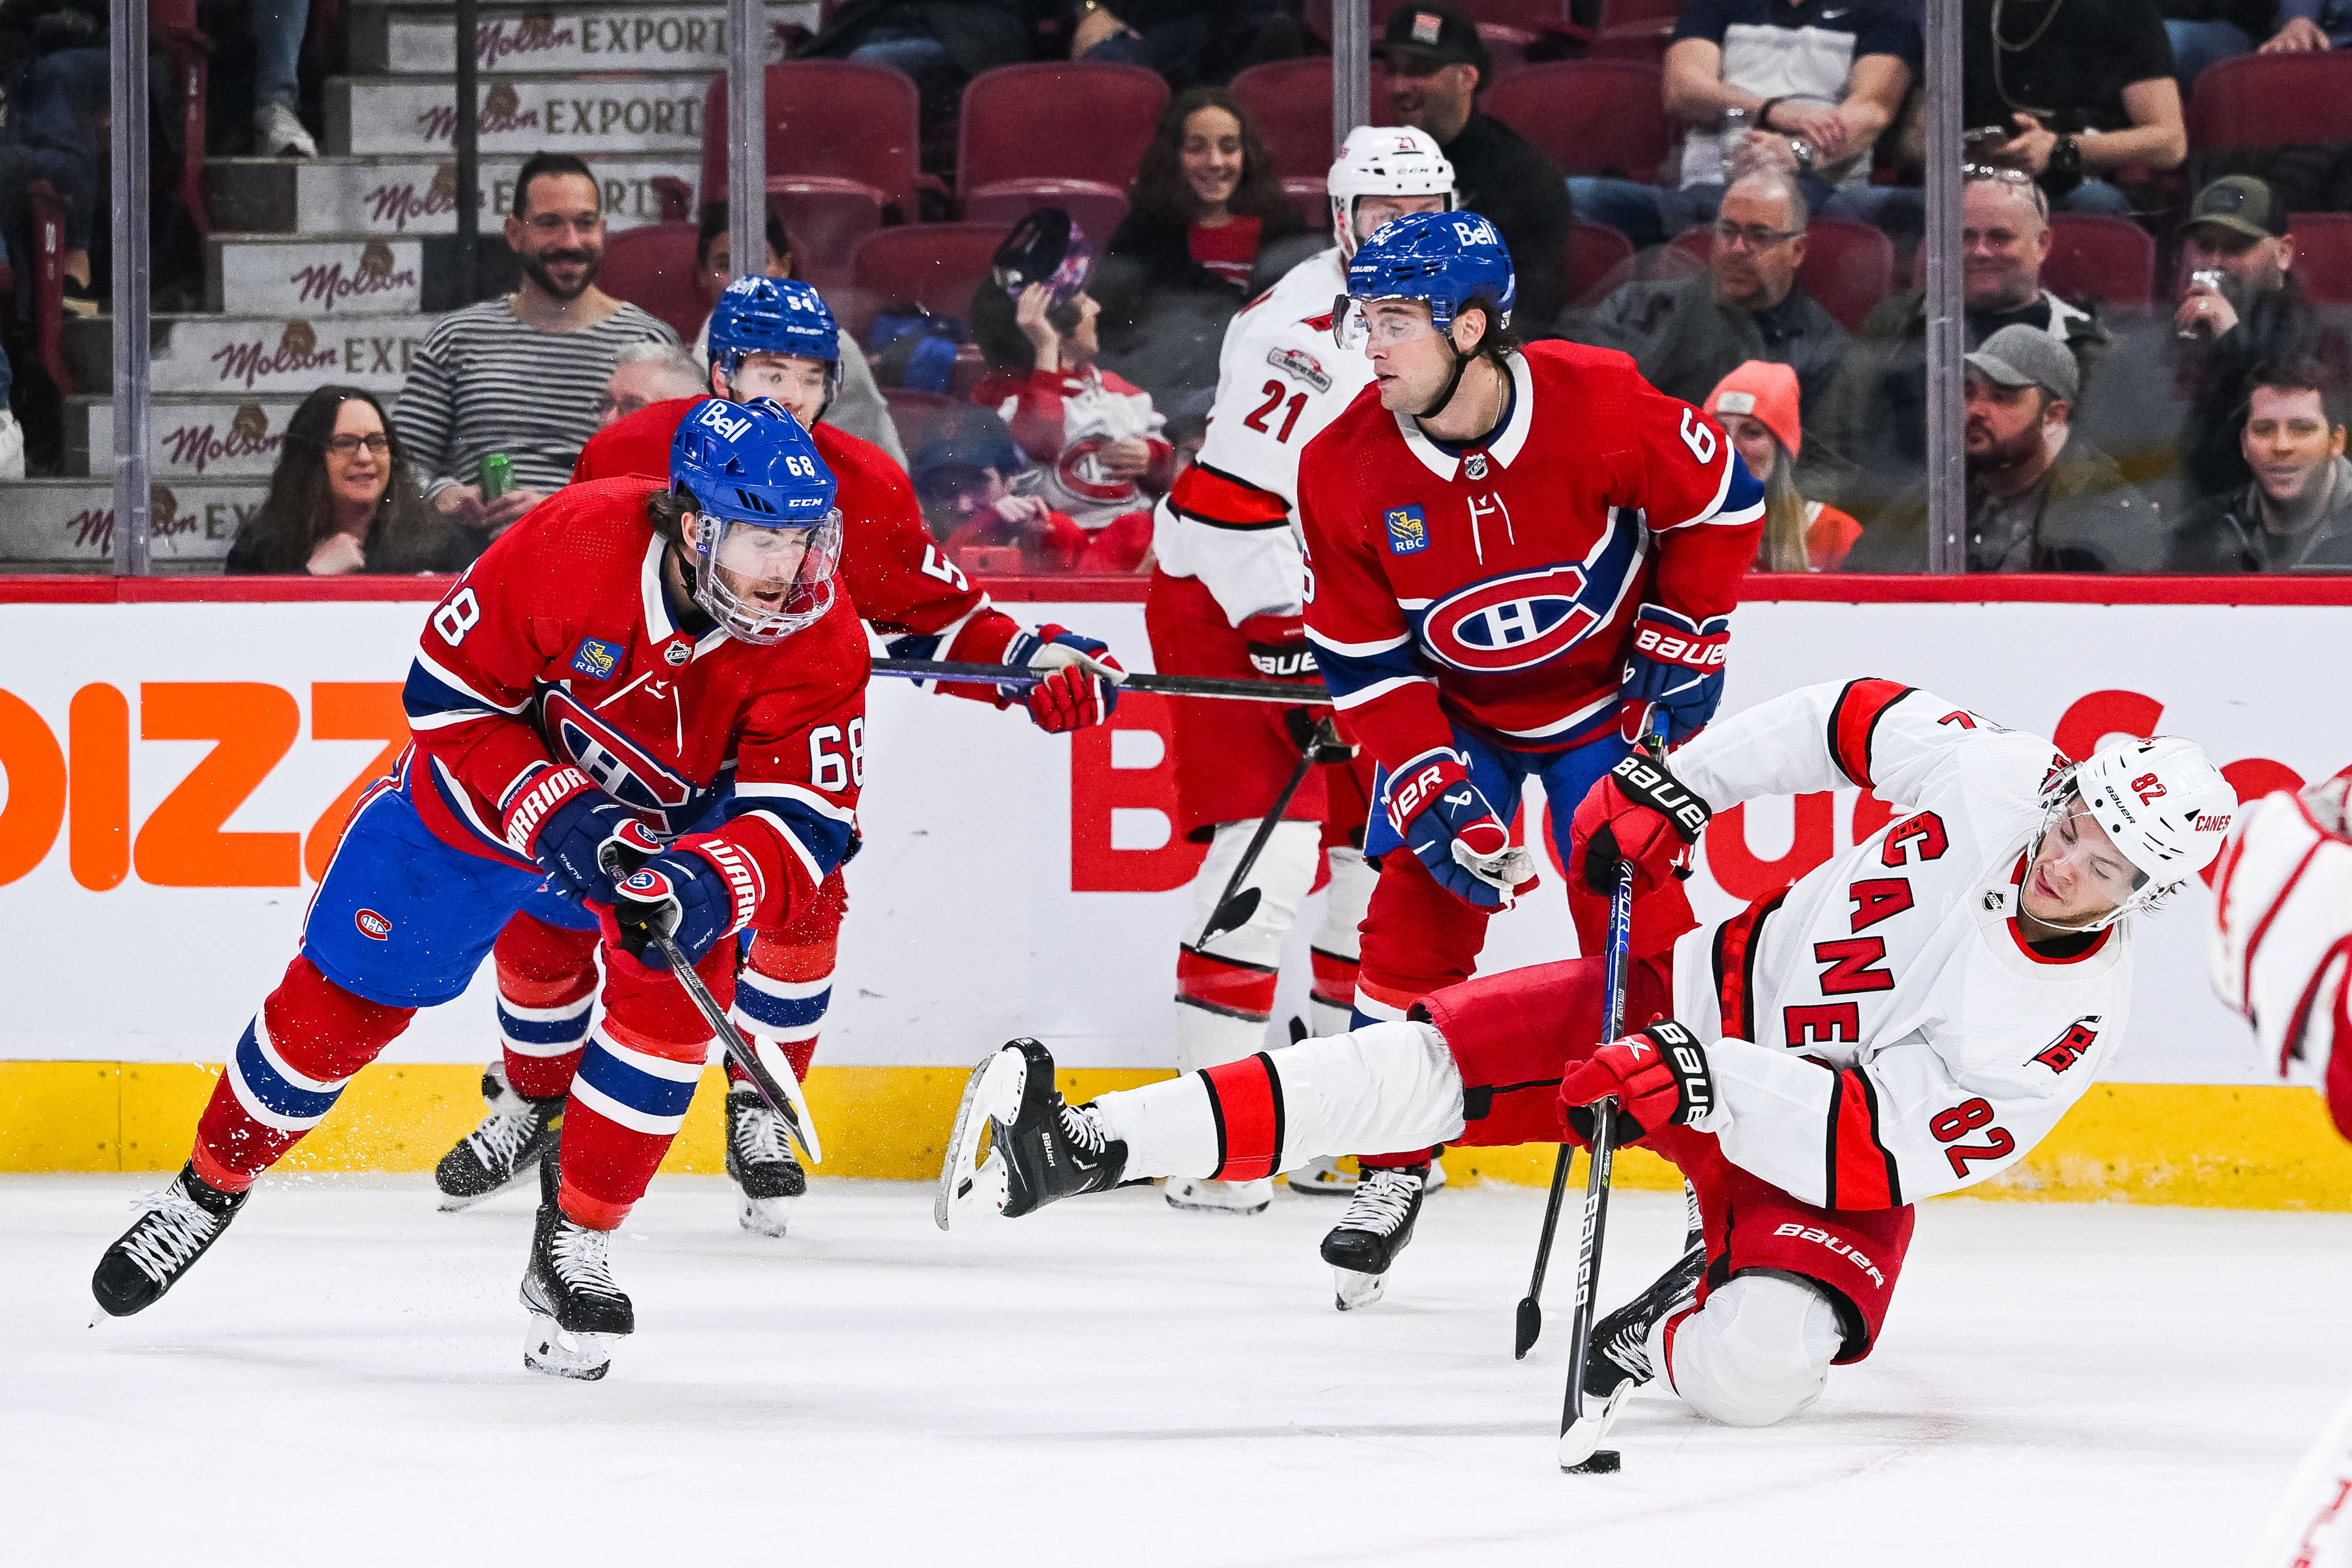 The Montreal Canadiens Revealed Their New Jersey & Here's Where